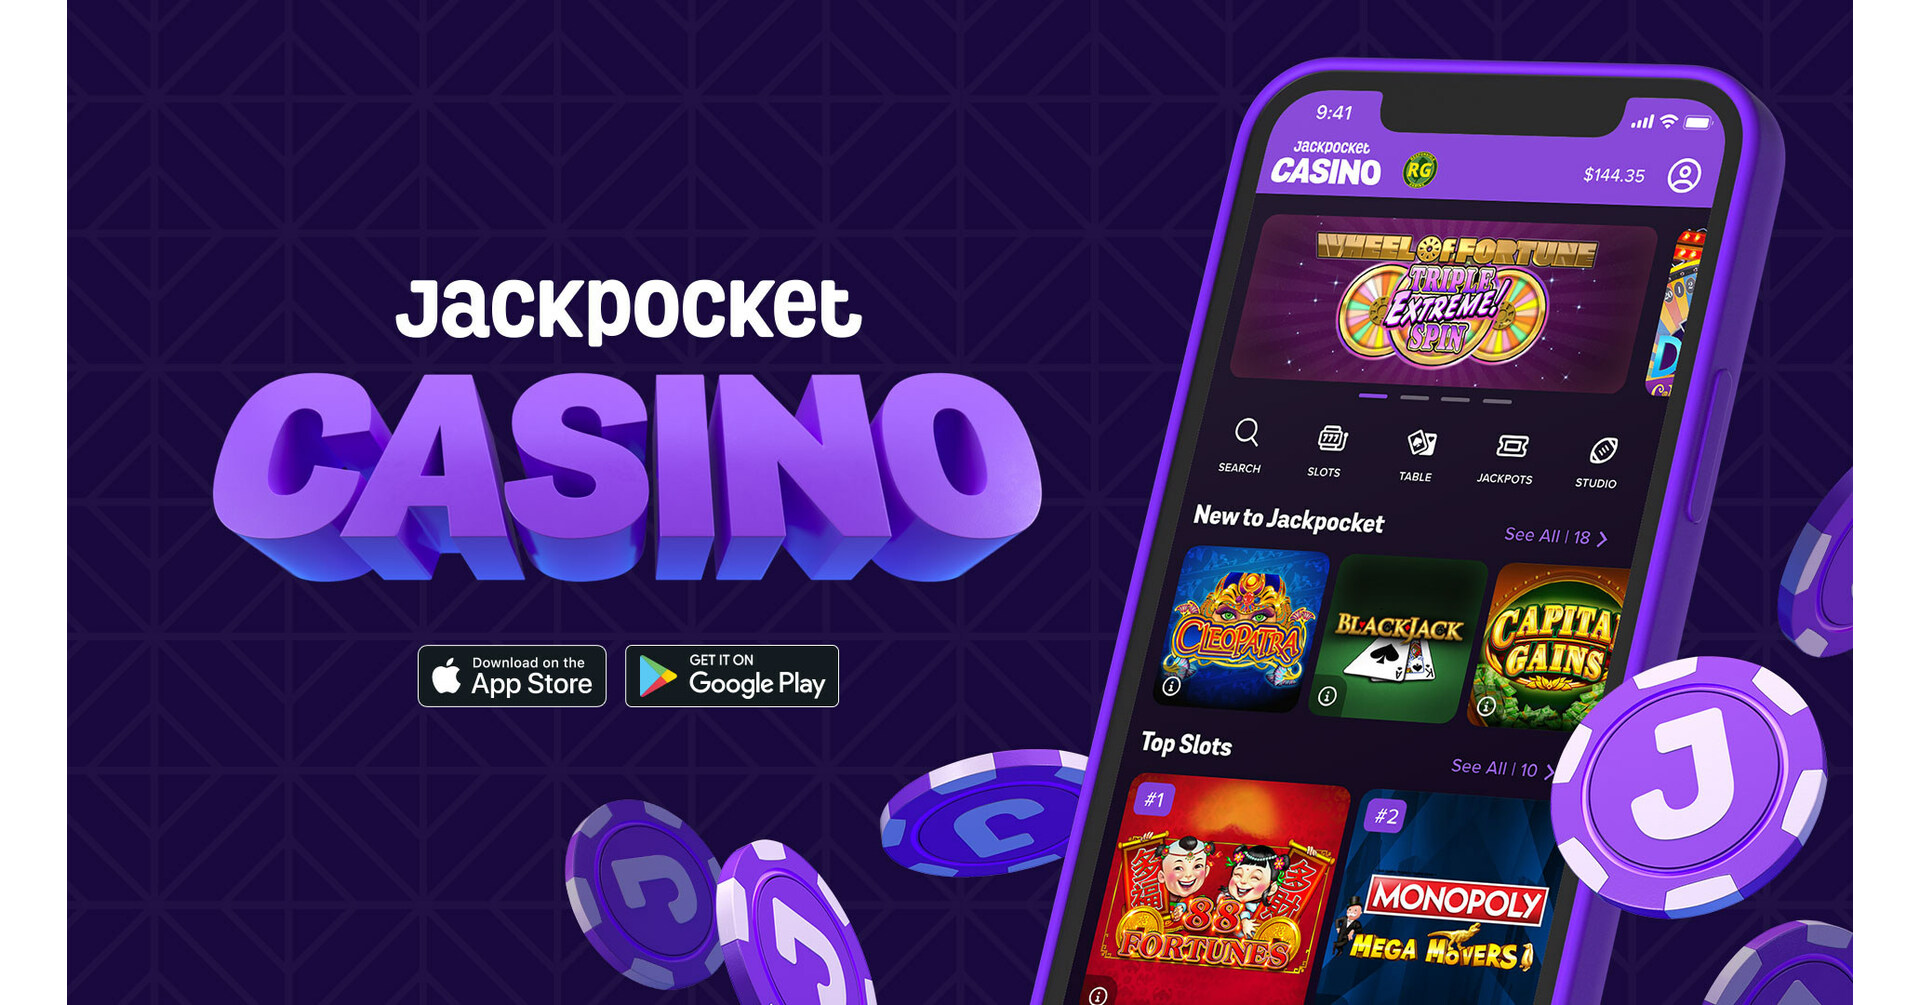 Jackpocket, America’s #1 Lottery App, Launches New Casino App In New Jersey